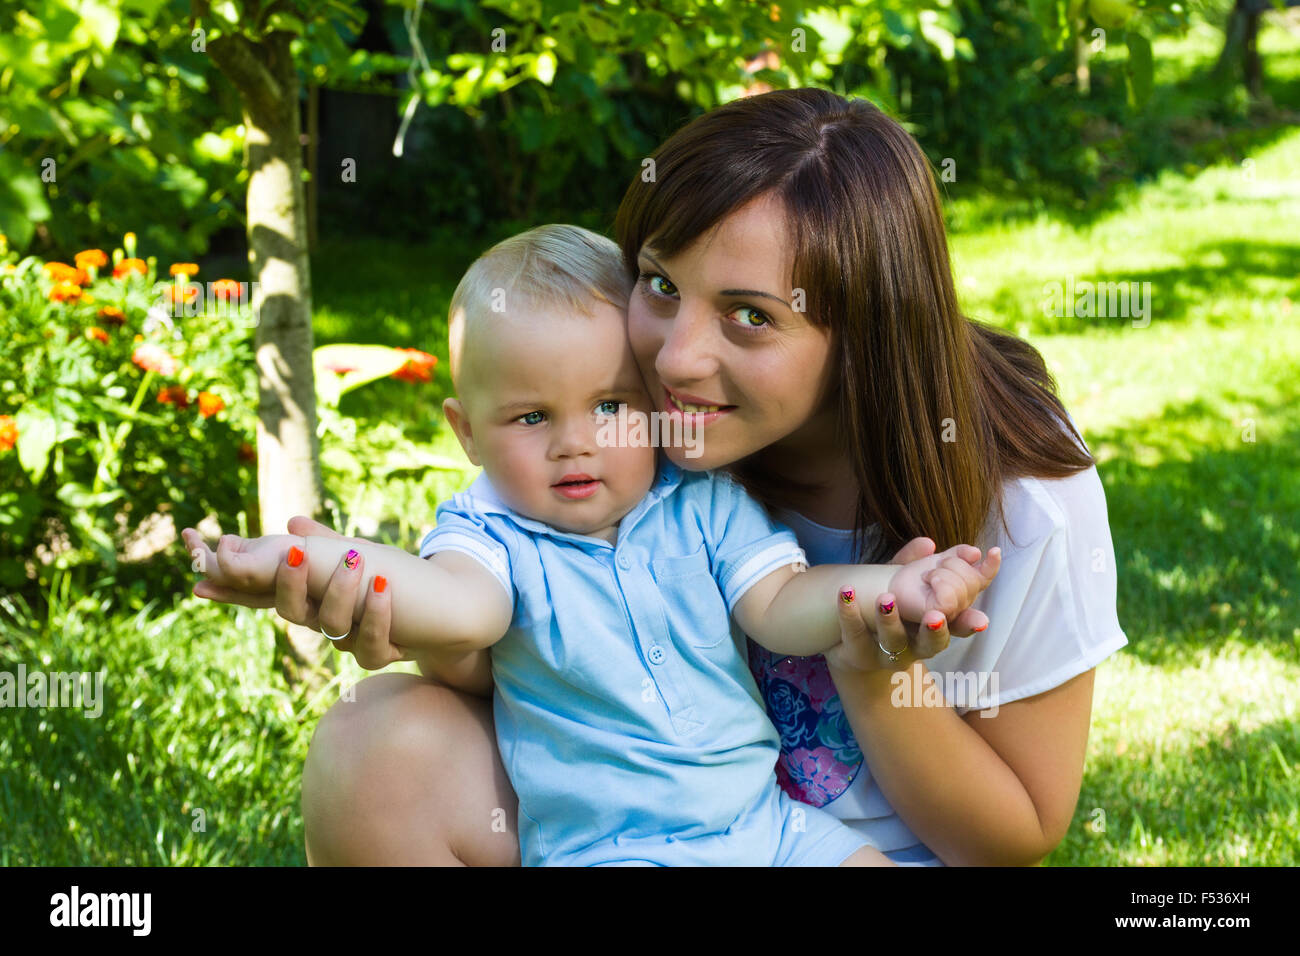 Charmant caucasian baby boy with mother in garden Banque D'Images